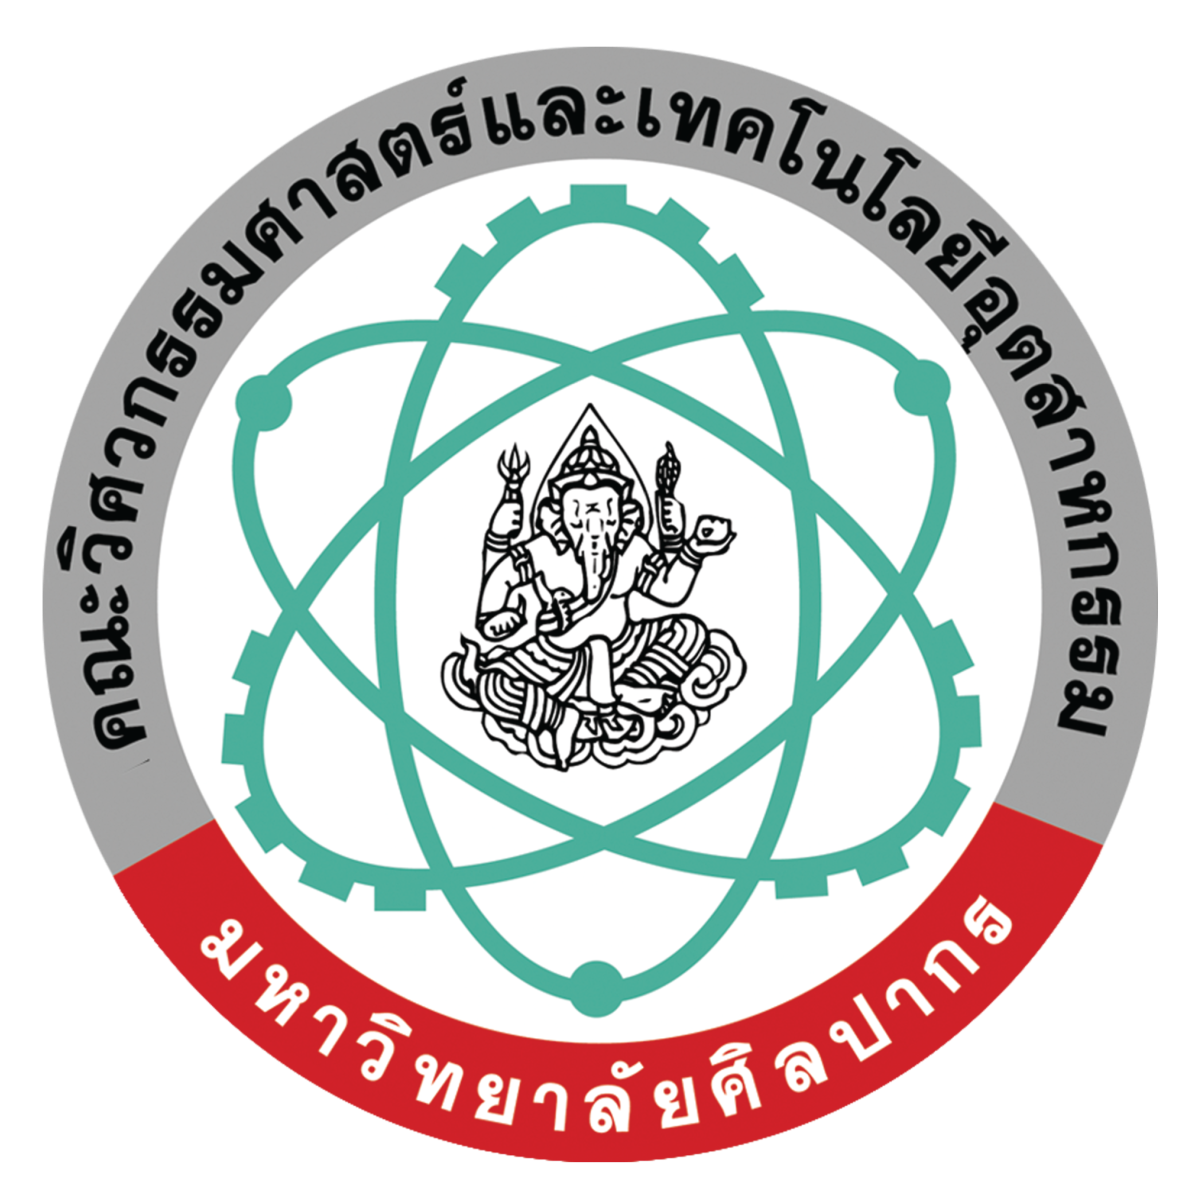 Faculty of Engineering and Industrial Technology, Silpakorn University 2